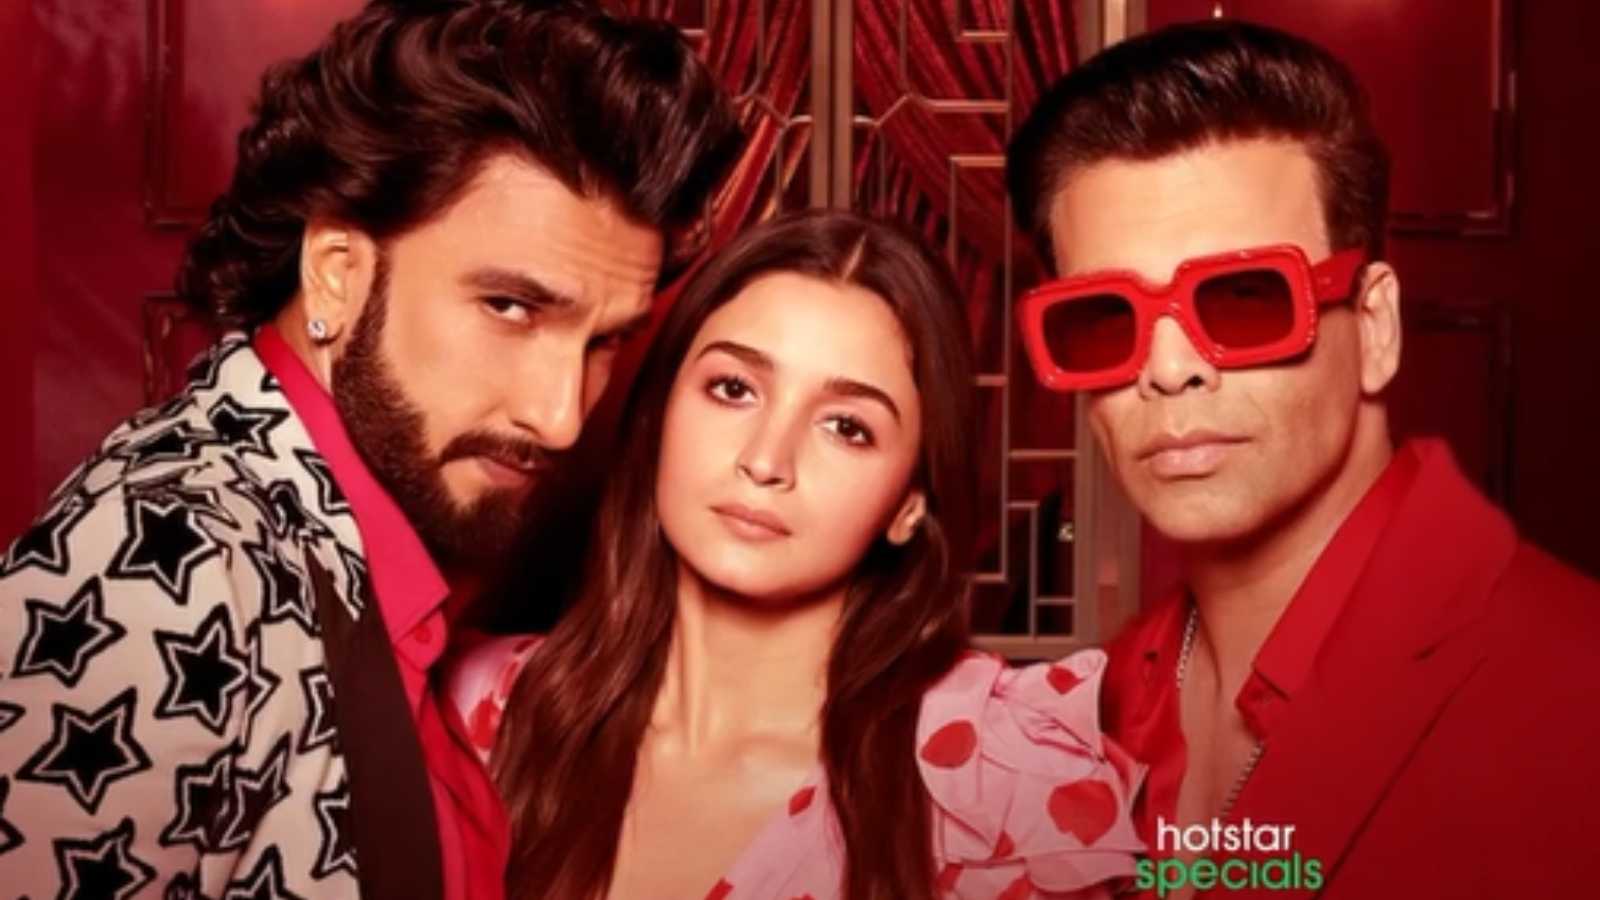 Bollywood celebs who made Koffee With Karan an 'A-rated' show, thanks to revelations about their bedroom shenanigans